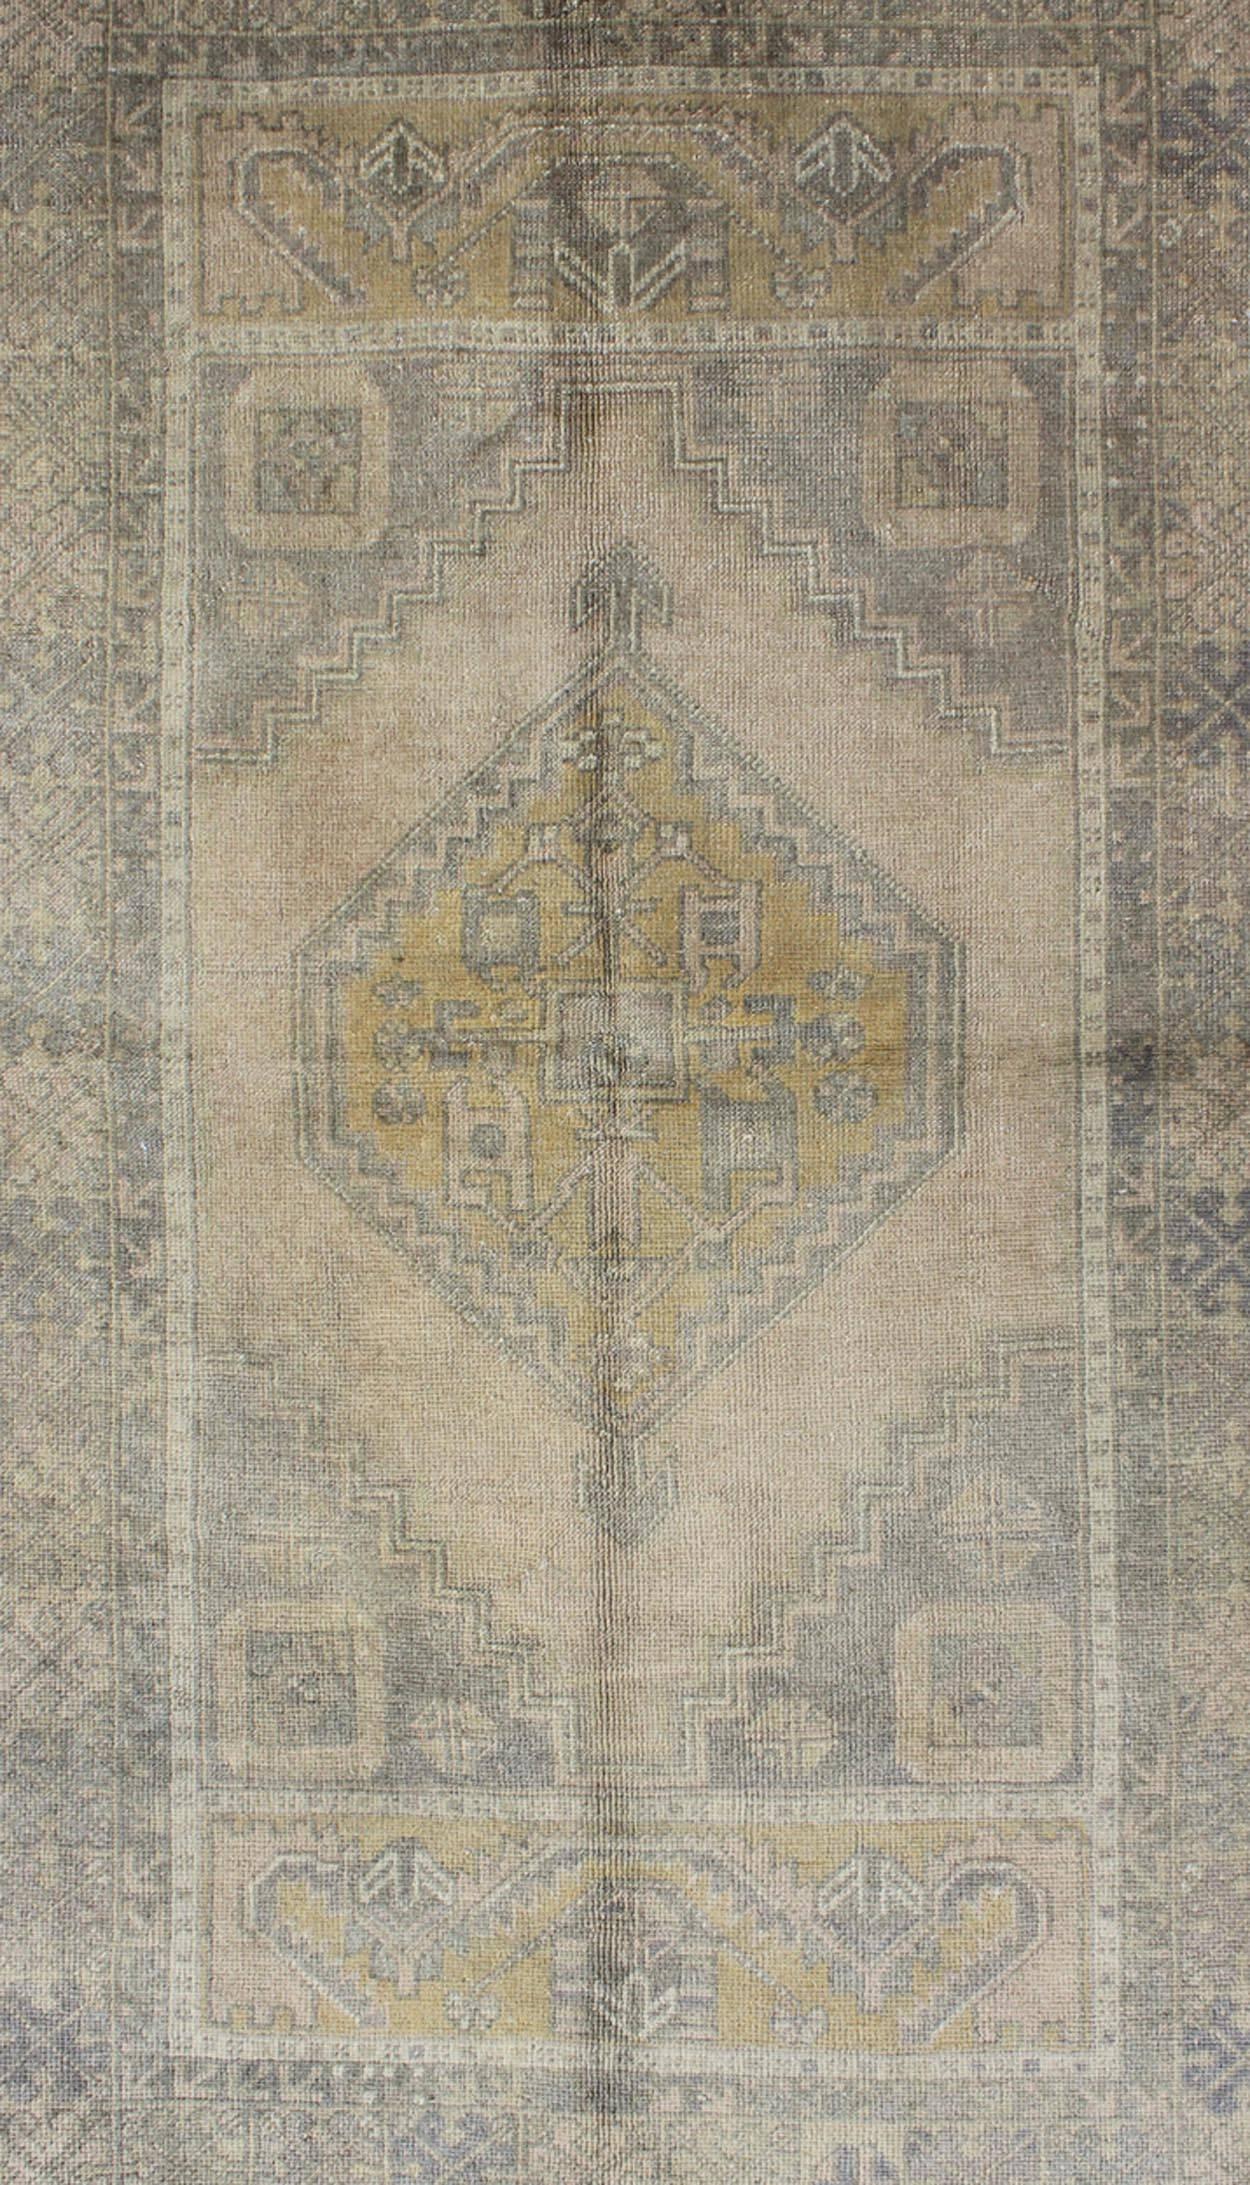 Hand-Knotted Muted Mid-Century Turkish Oushak Rug with Tribal Geometric Medallion Design